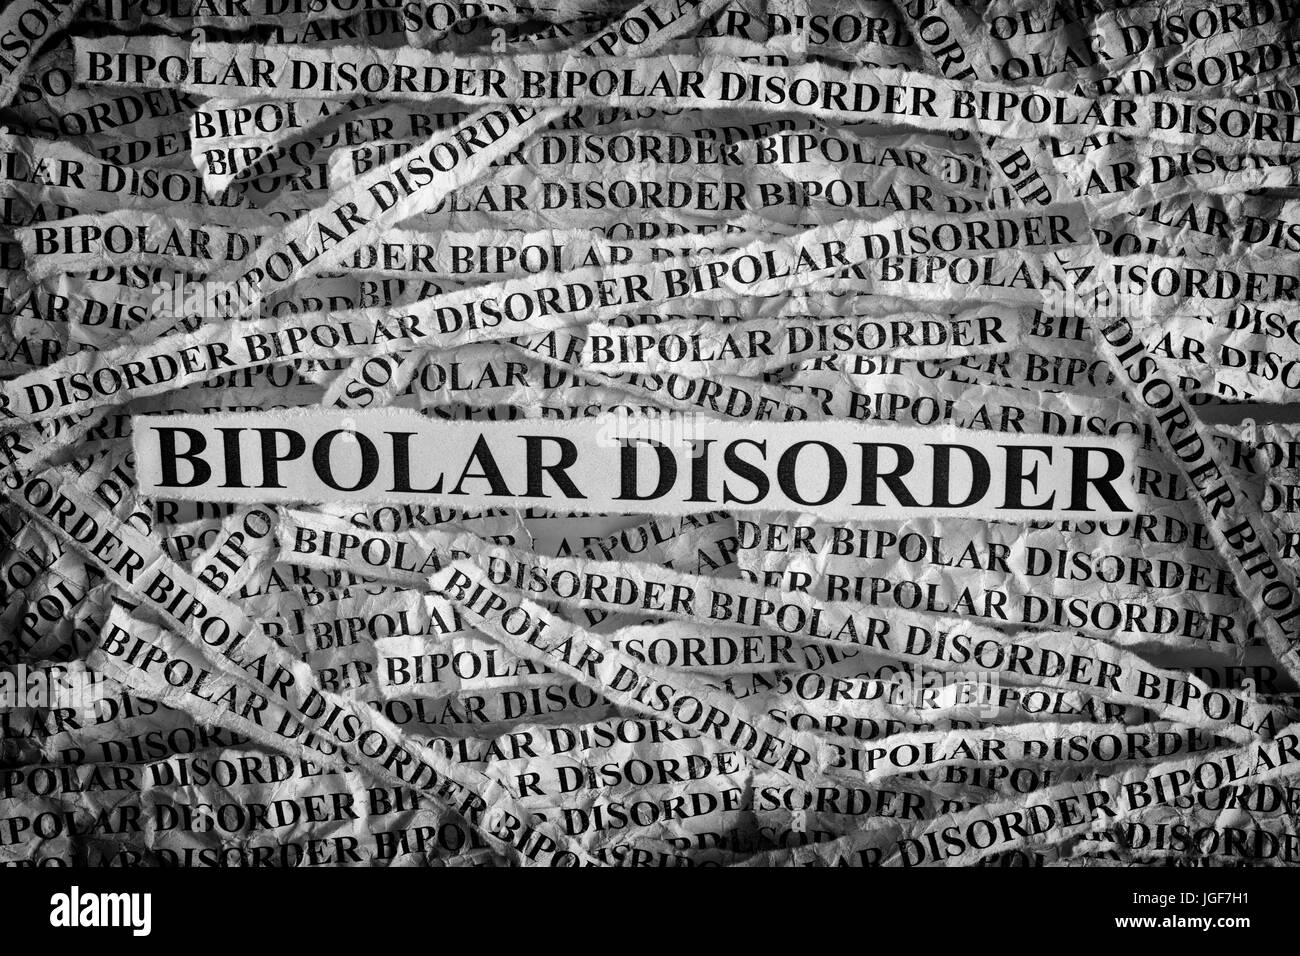 Preventing Bipolar Relapse by Ruth C. White